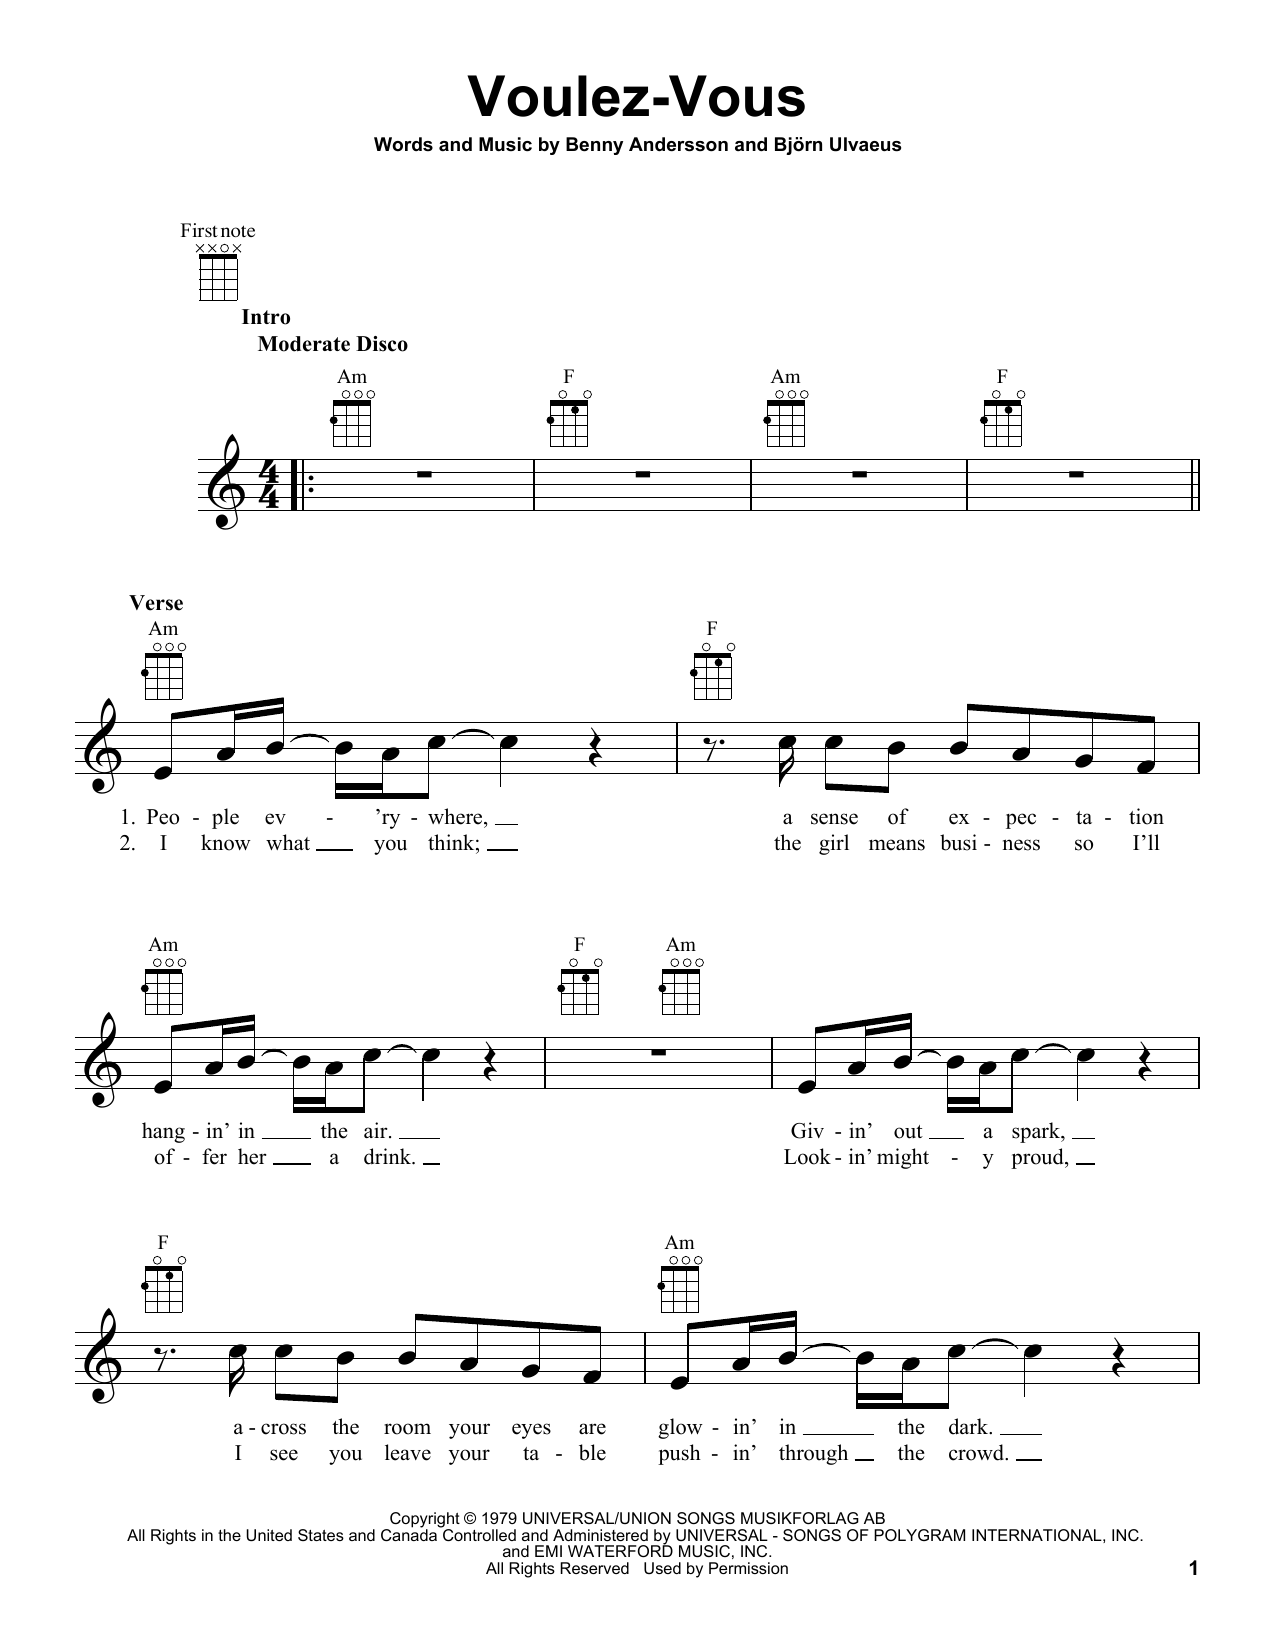 ABBA Voulez-Vous sheet music notes and chords. Download Printable PDF.